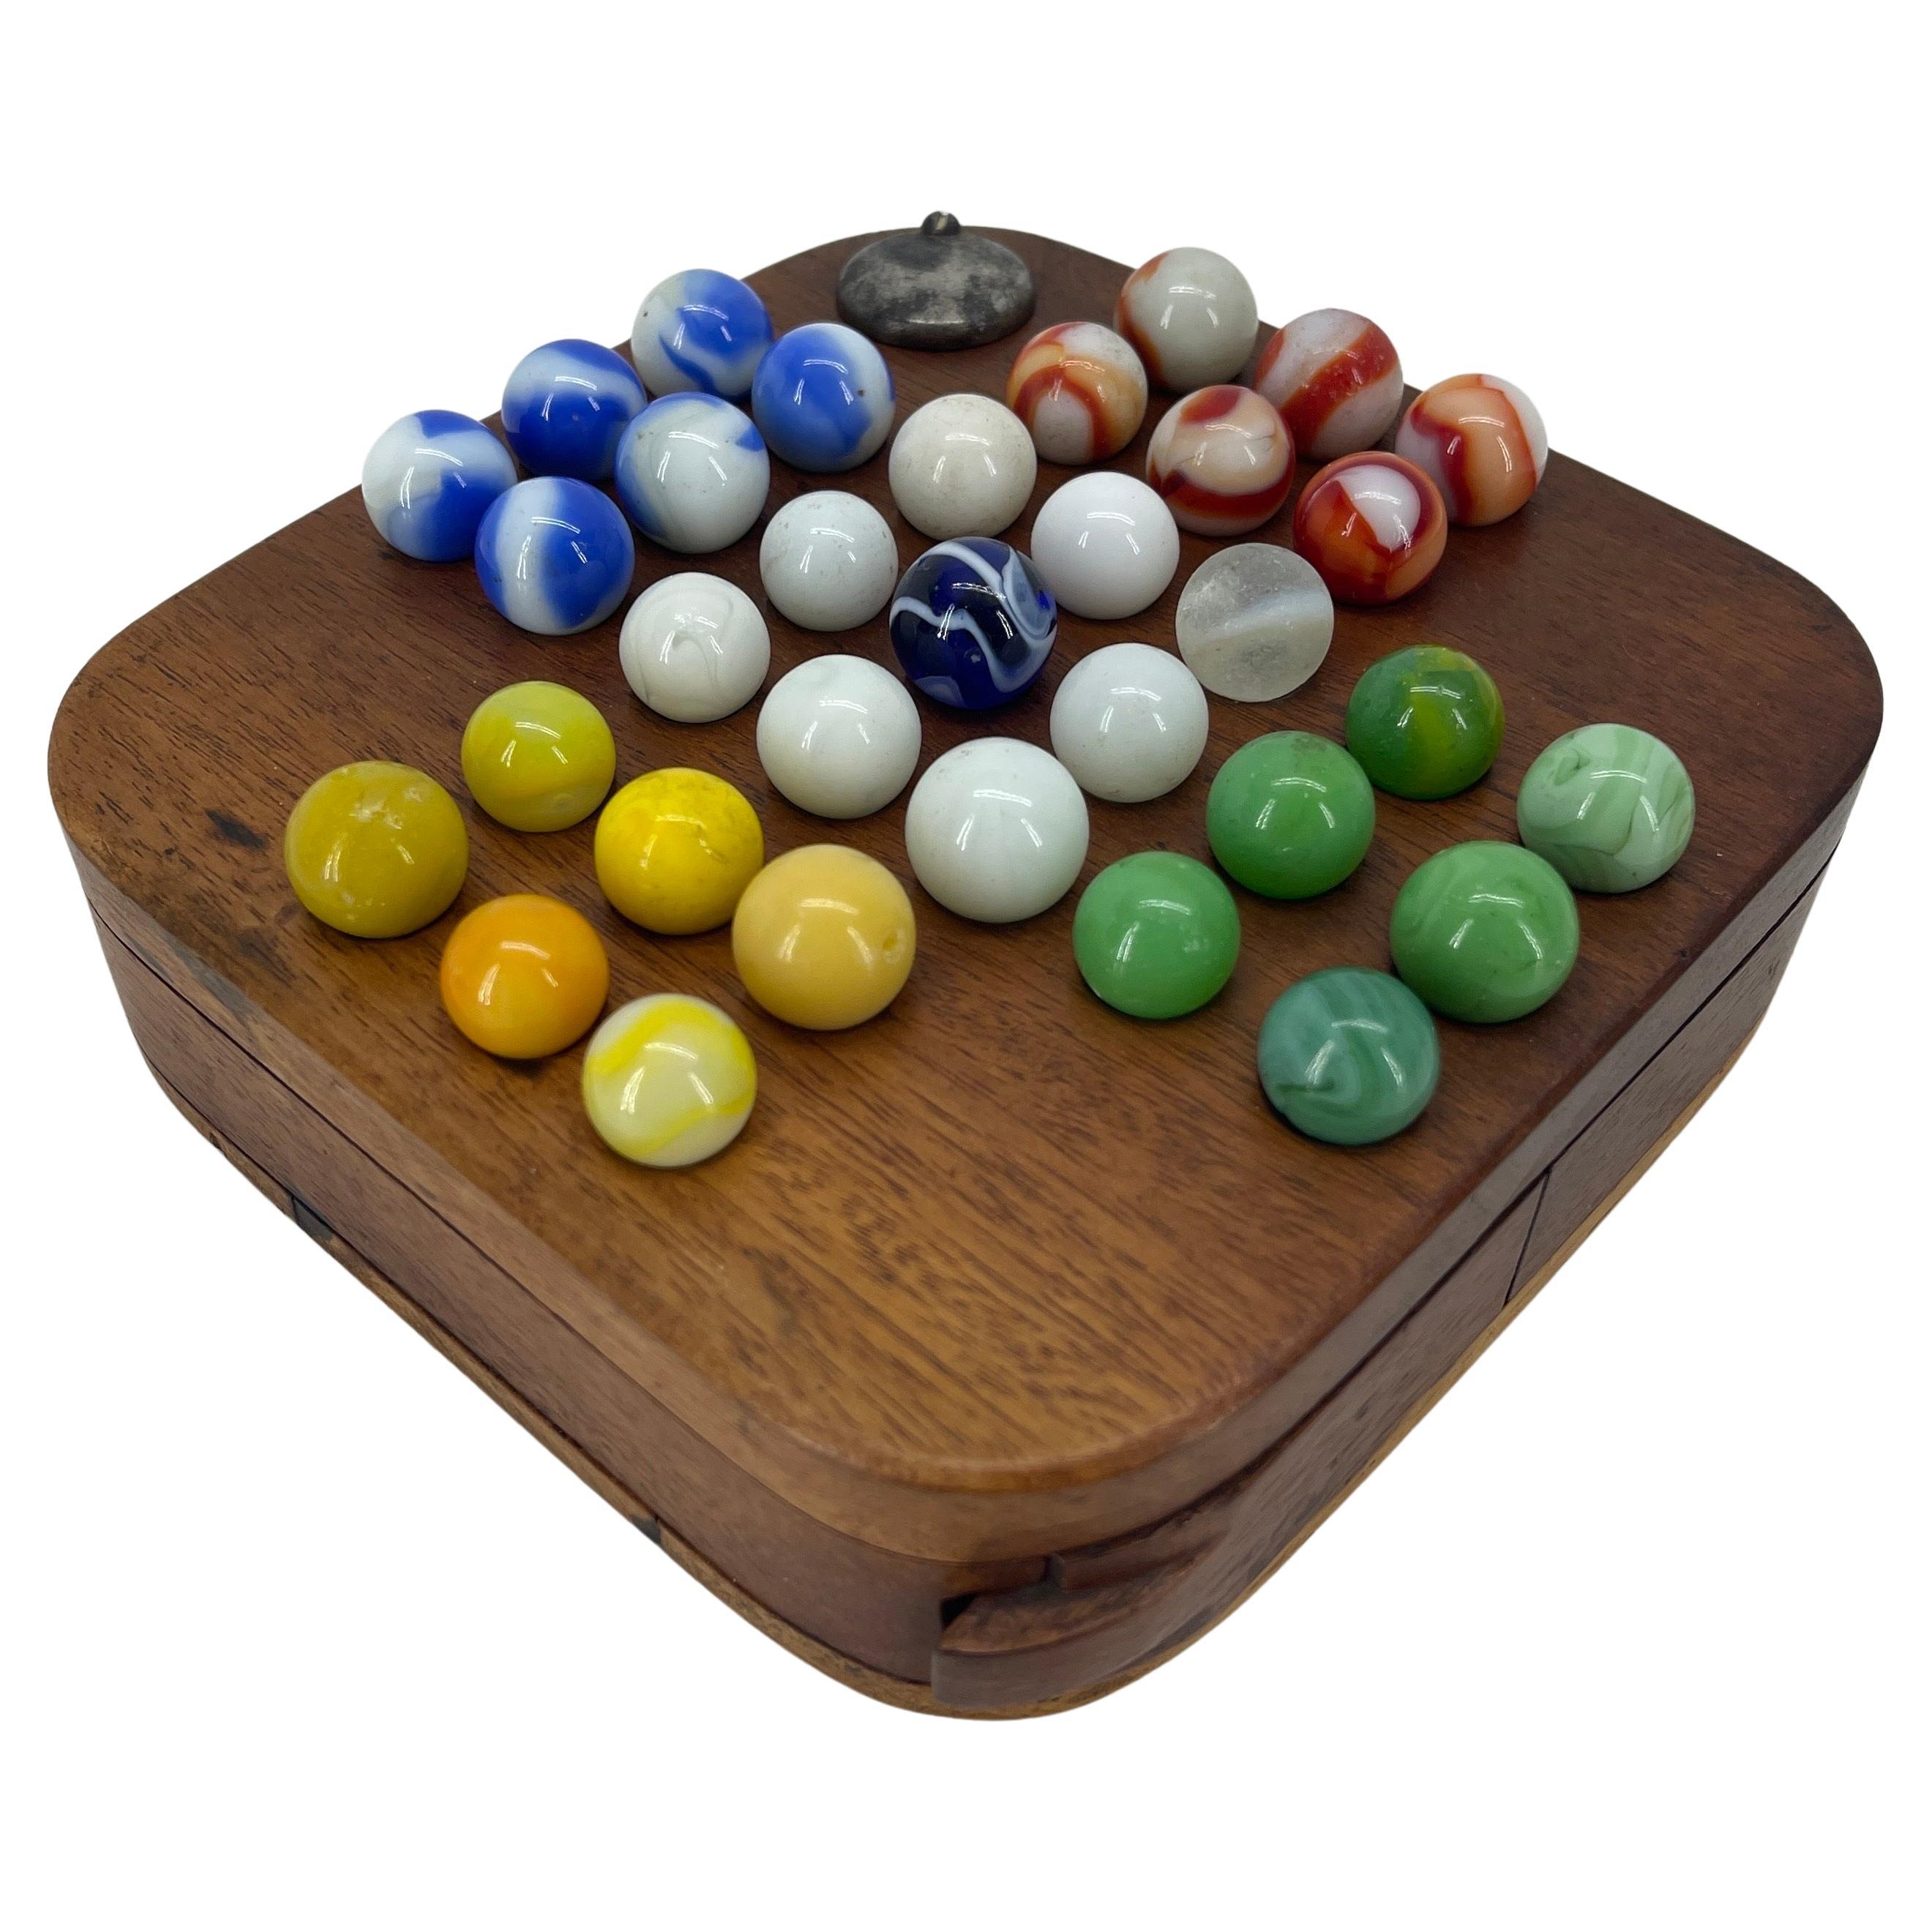 Small Wood Board Game With 31 Glass Balls For Chinese Checkers. The board has an internal compartment to store the glass balls.


